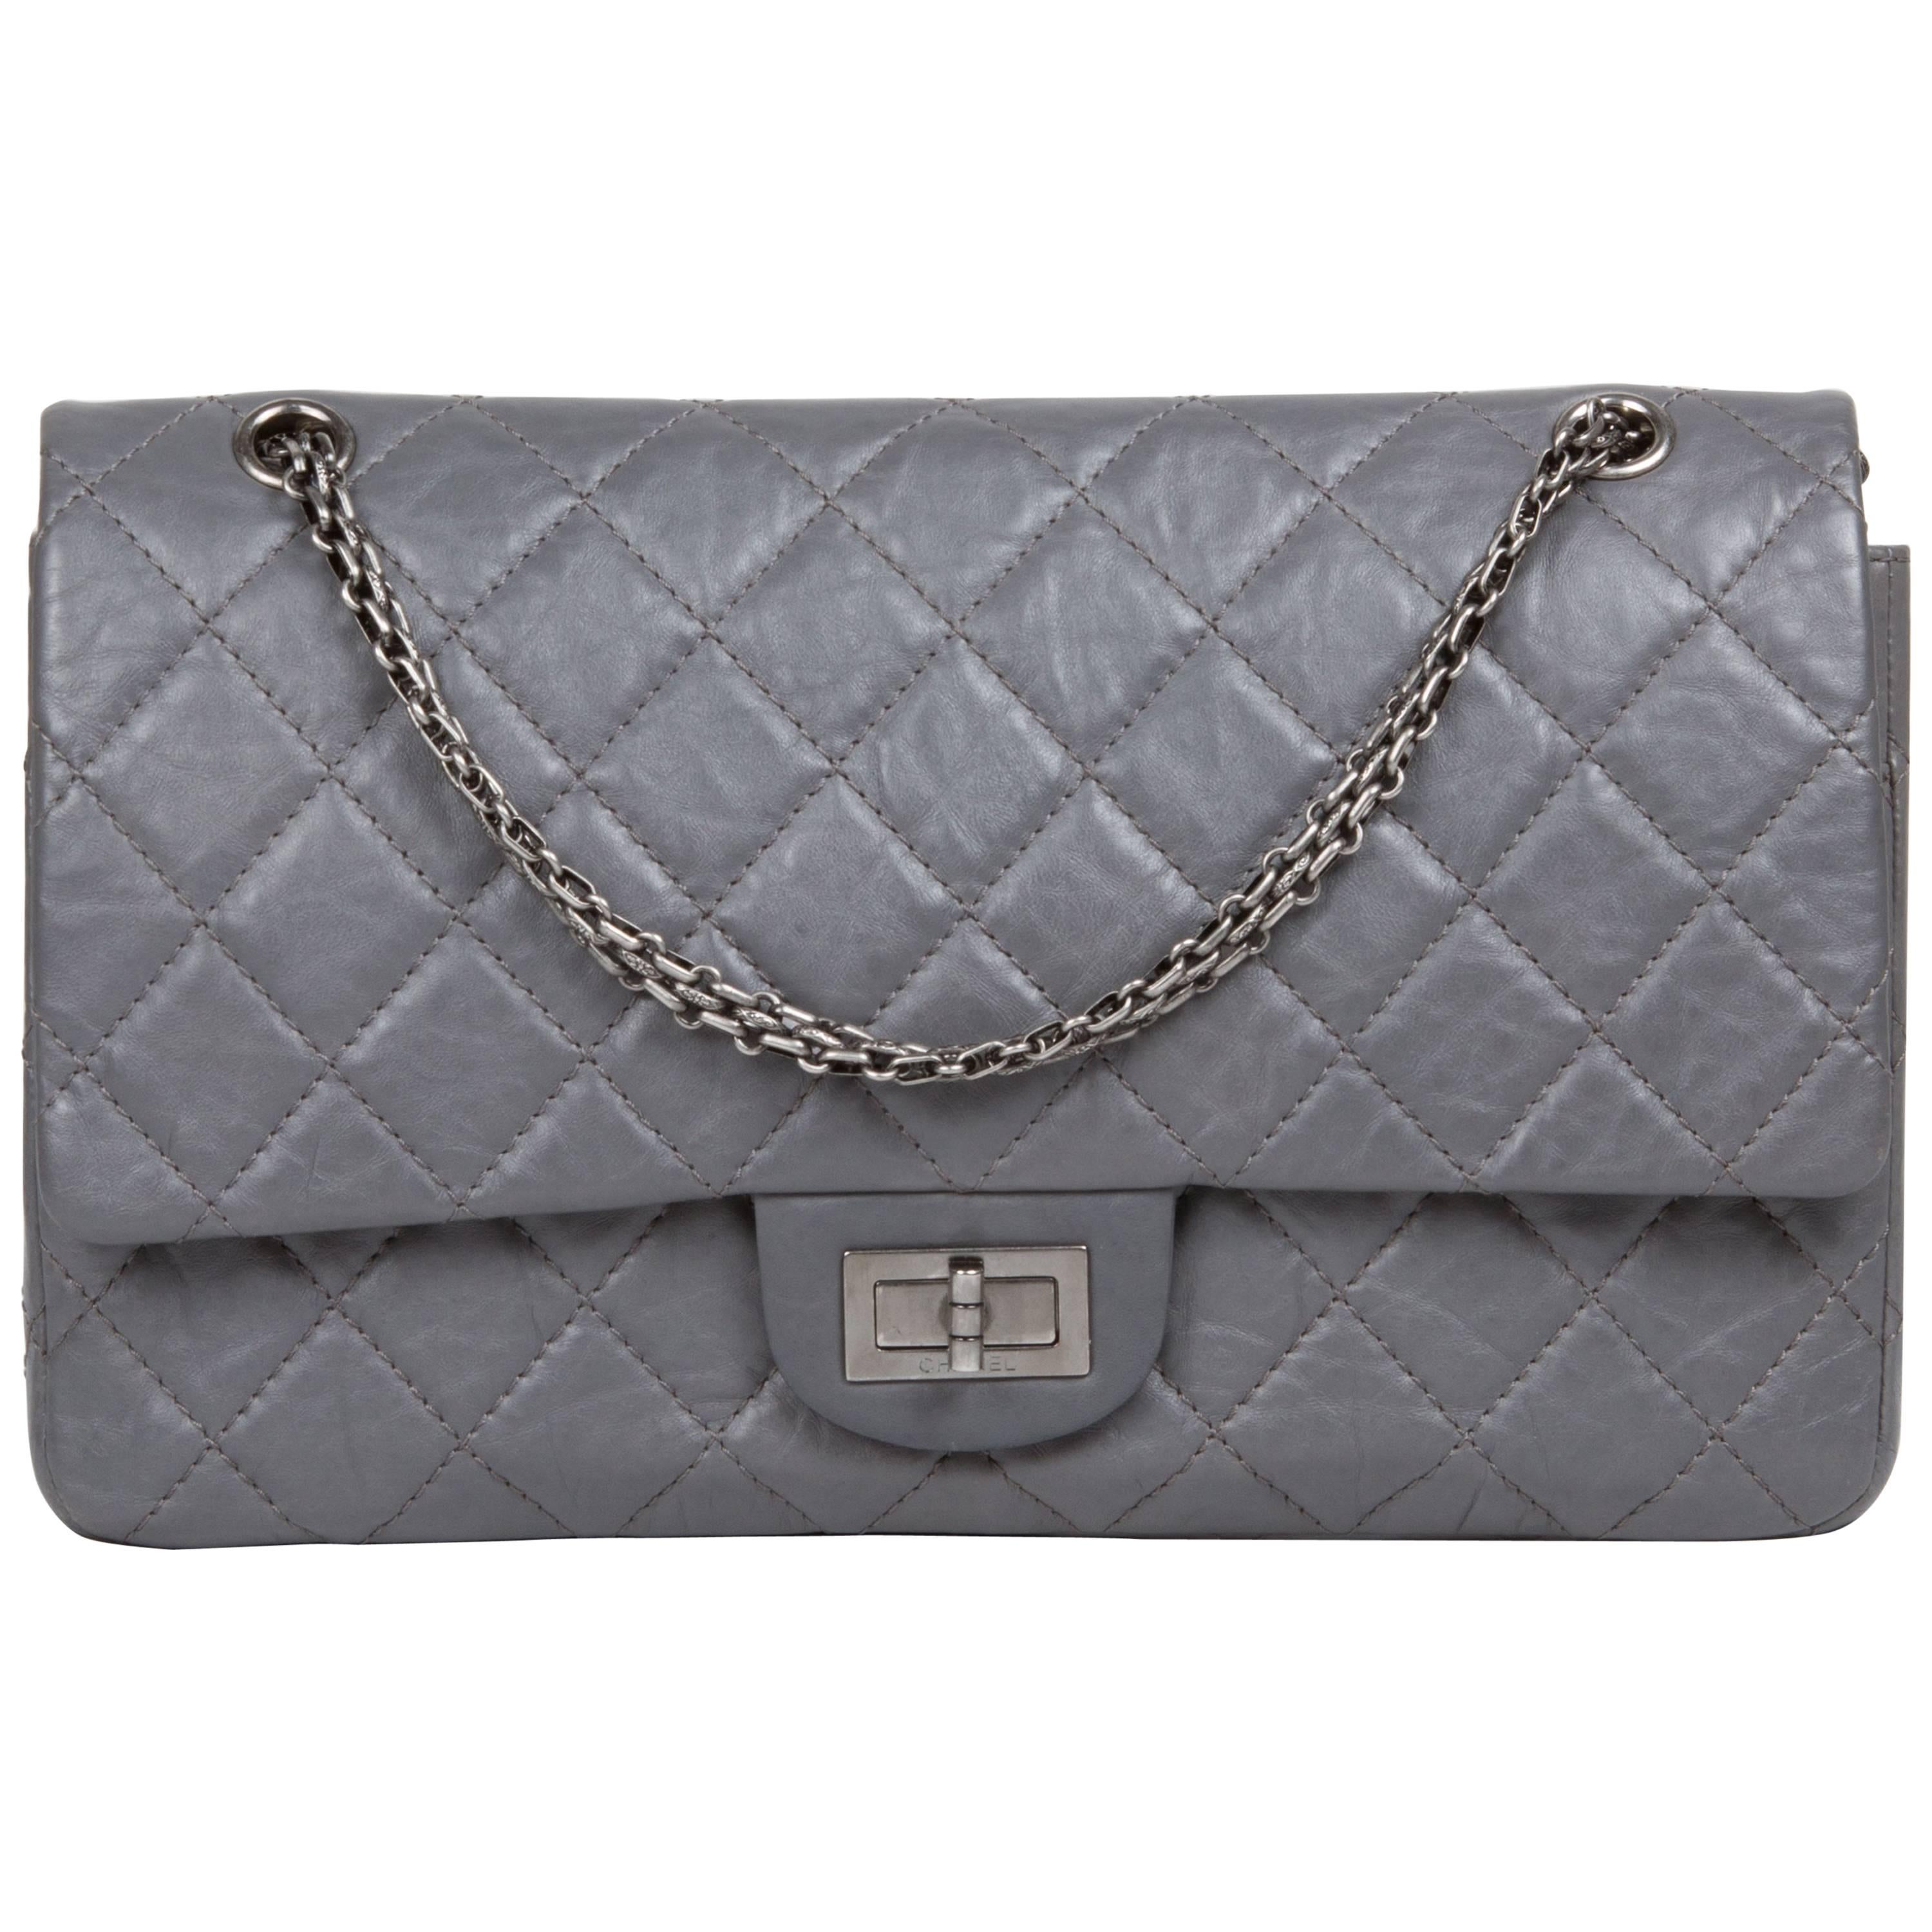 Chanel Reissue 227  Grey Leather Pristine Conditions For Sale